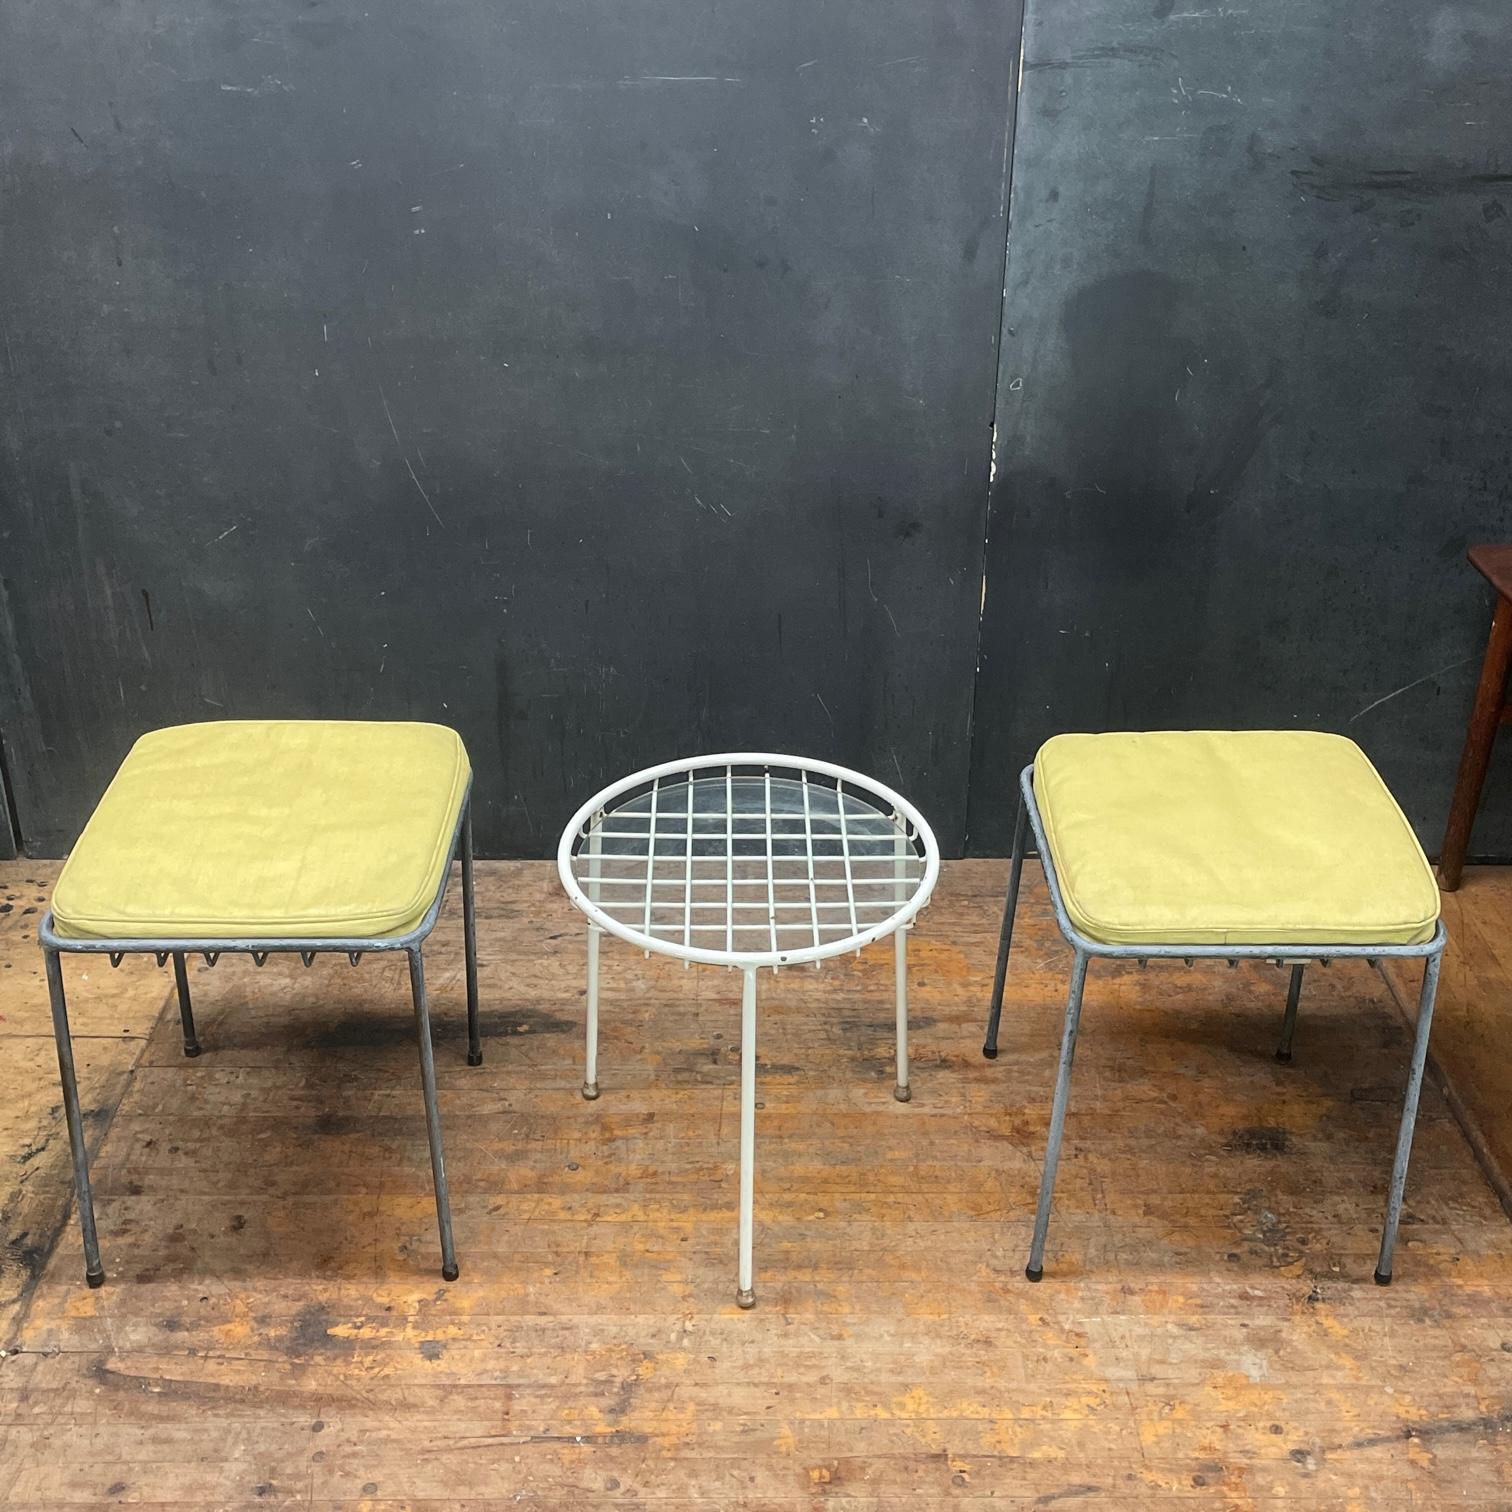 Rare 1950s California Modern George Nelson Arbuck Outdoor Iron Stools / Tables  For Sale 6